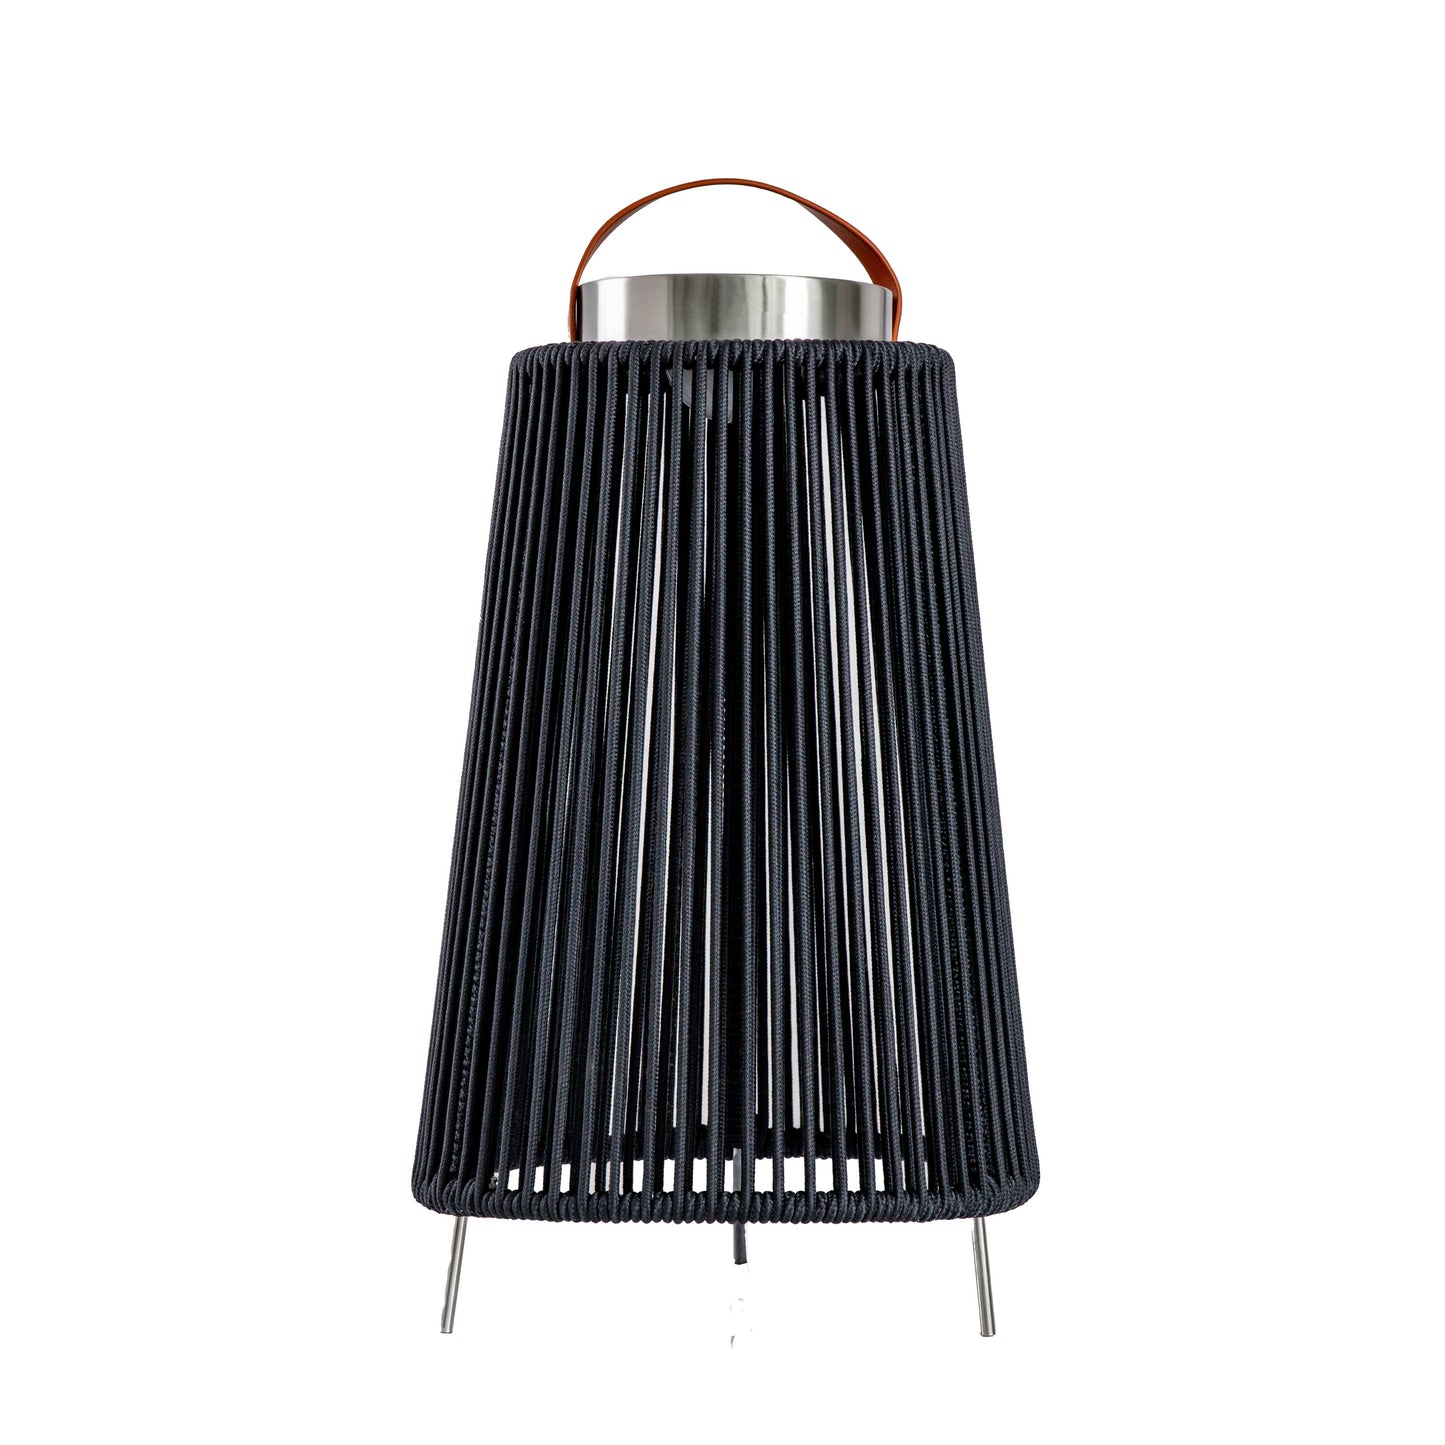 A Marldon LED Solar Lantern Large with a black shade and a brown handle, perfect for interior decor.